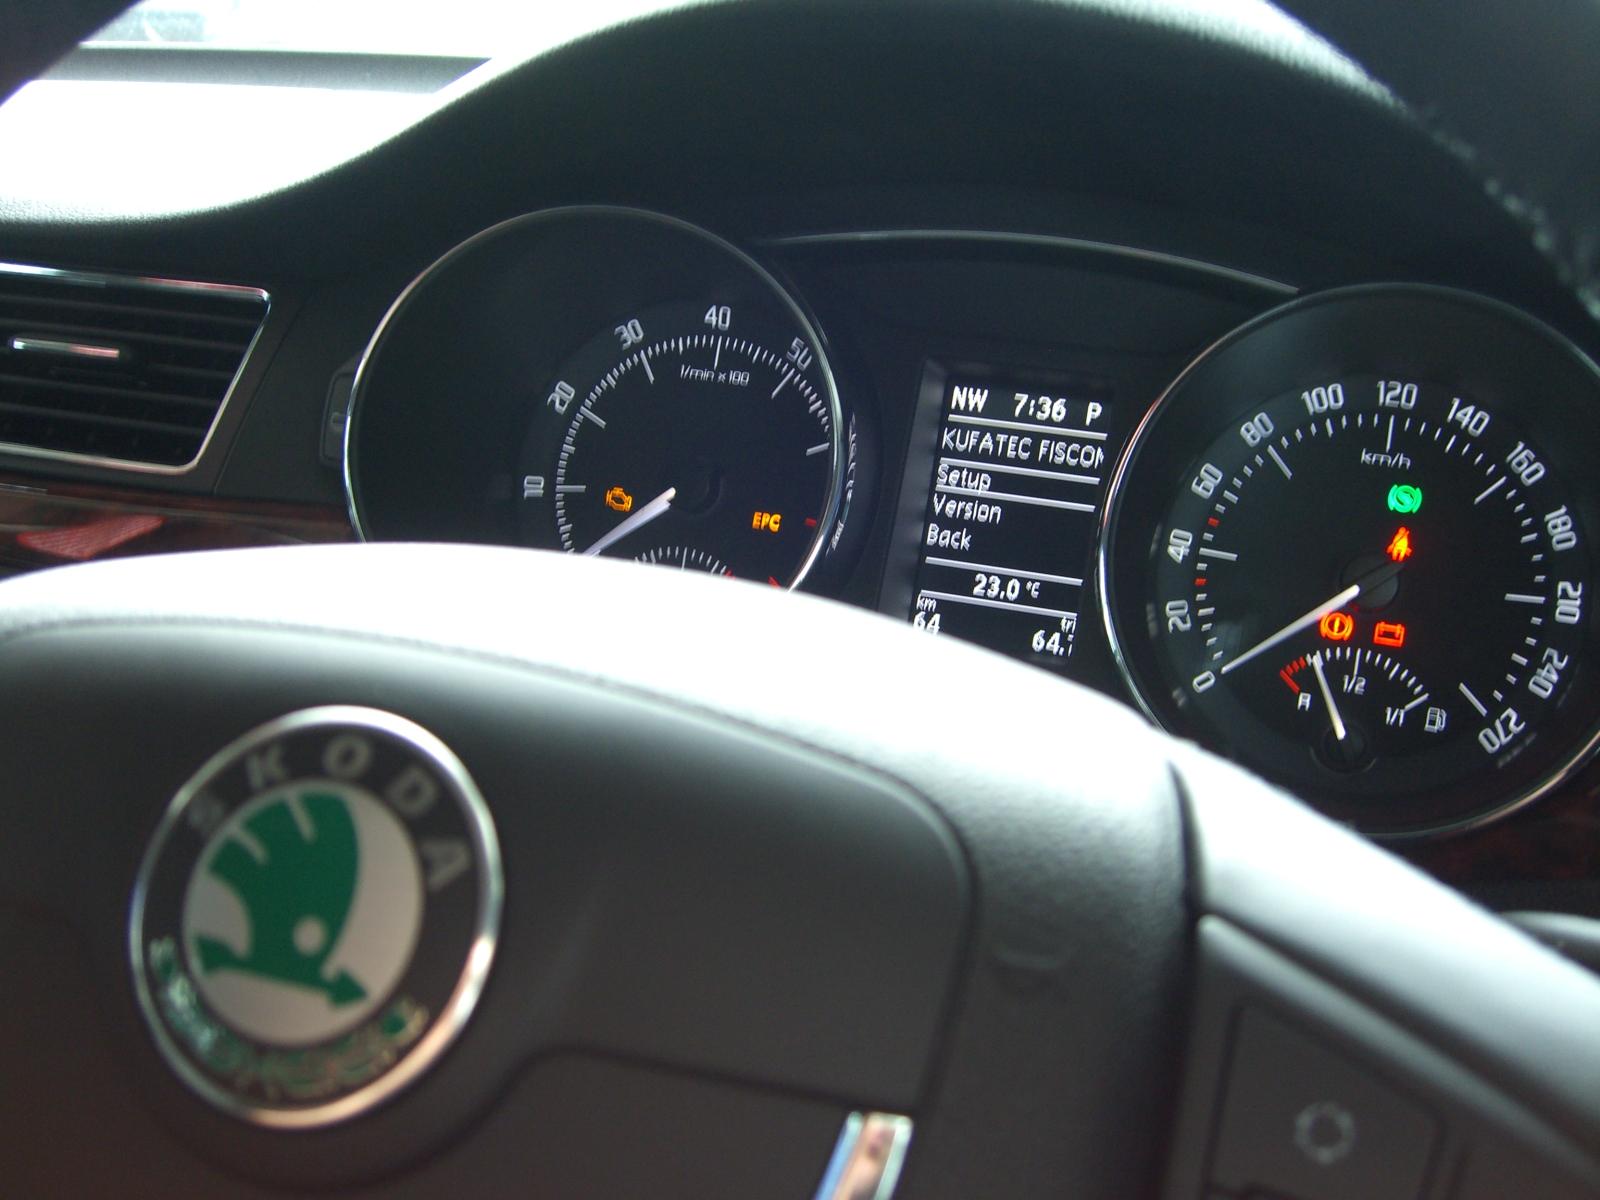 Skoda Octavia Fiscon Bluetooth install functions with MFD display in instrument cluster